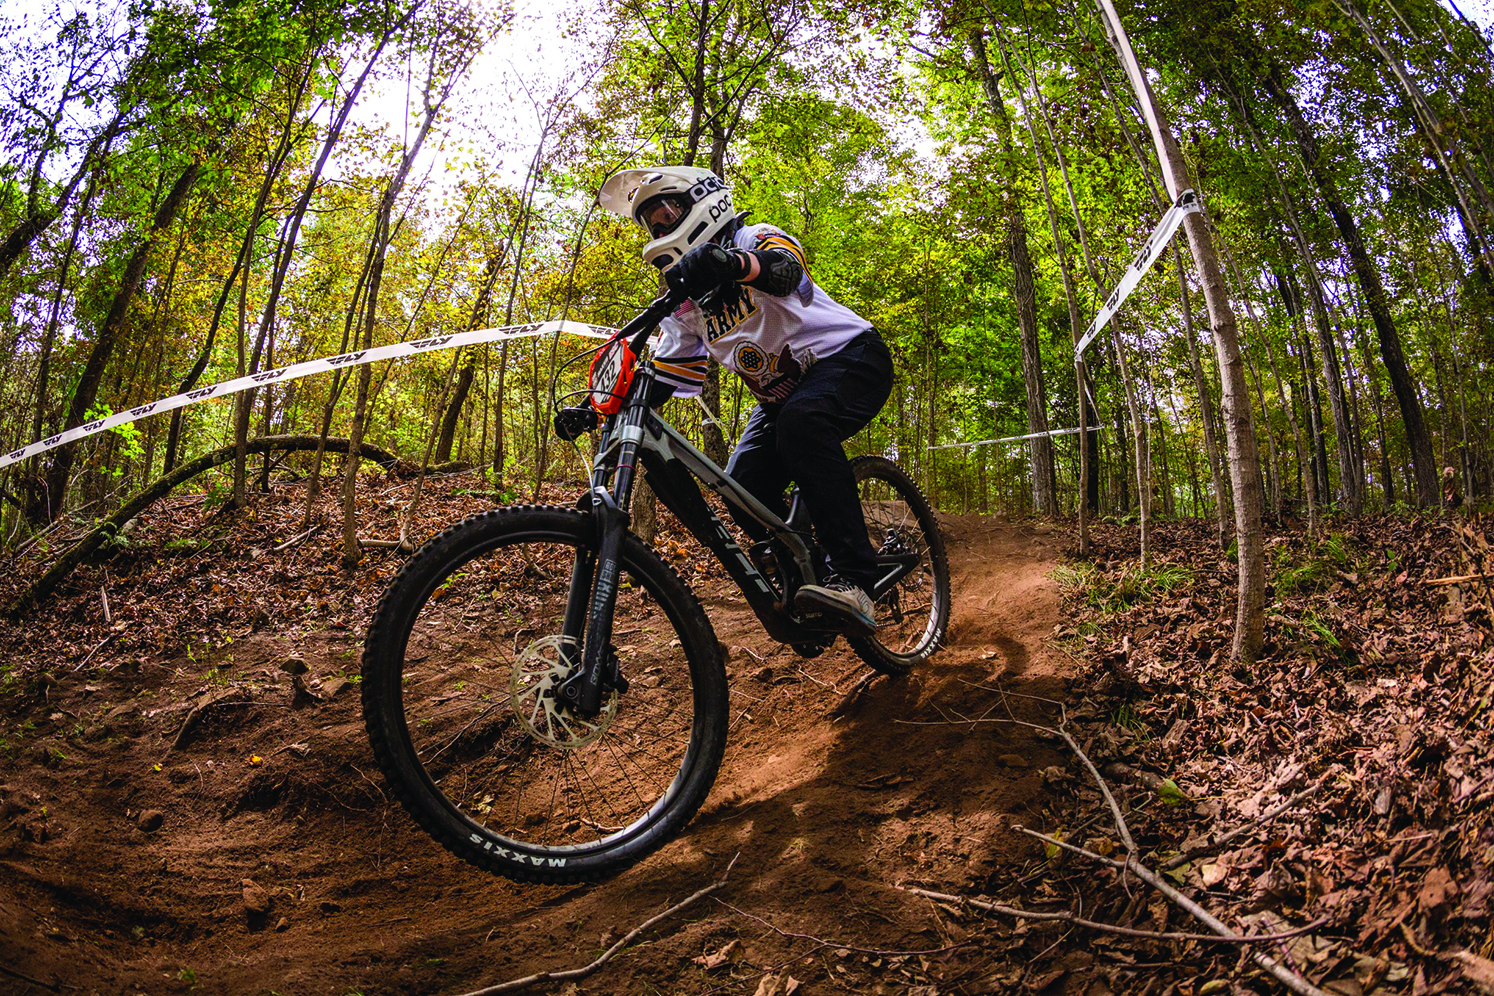 COL Judy Boyd, Commander of the 13th Legal Operations Detachment-Expert, focuses on the trail ahead as she goes on to successfully (and safely) compete in the 2020 Maxxis Eastern States Cup Intense Downhill Race at Powder Ridge, Connecticut.